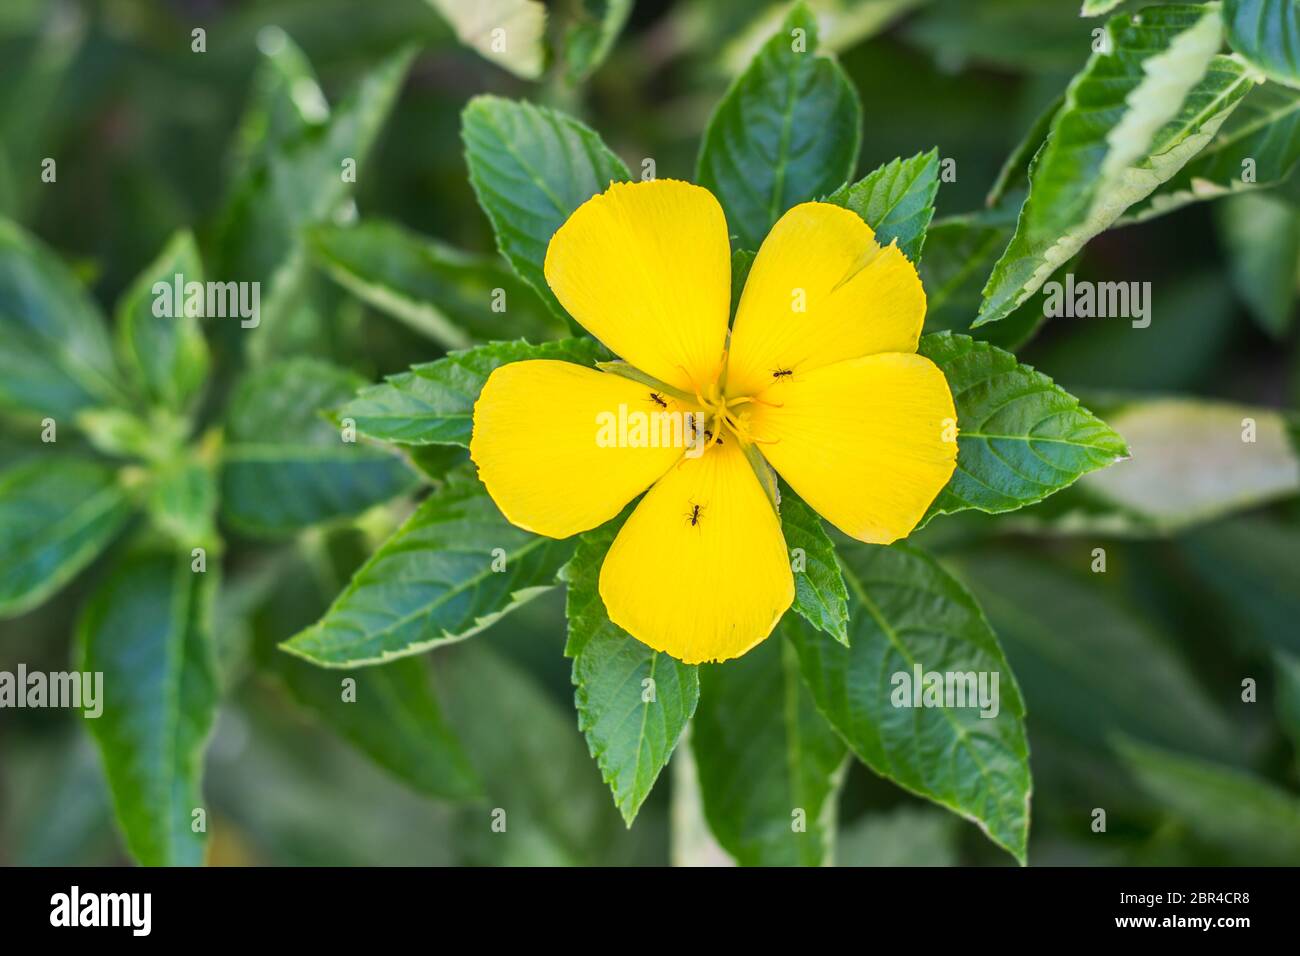 Yellow flower blooming in the garden, Ant on flower, ramgoat dashalong Stock Photo